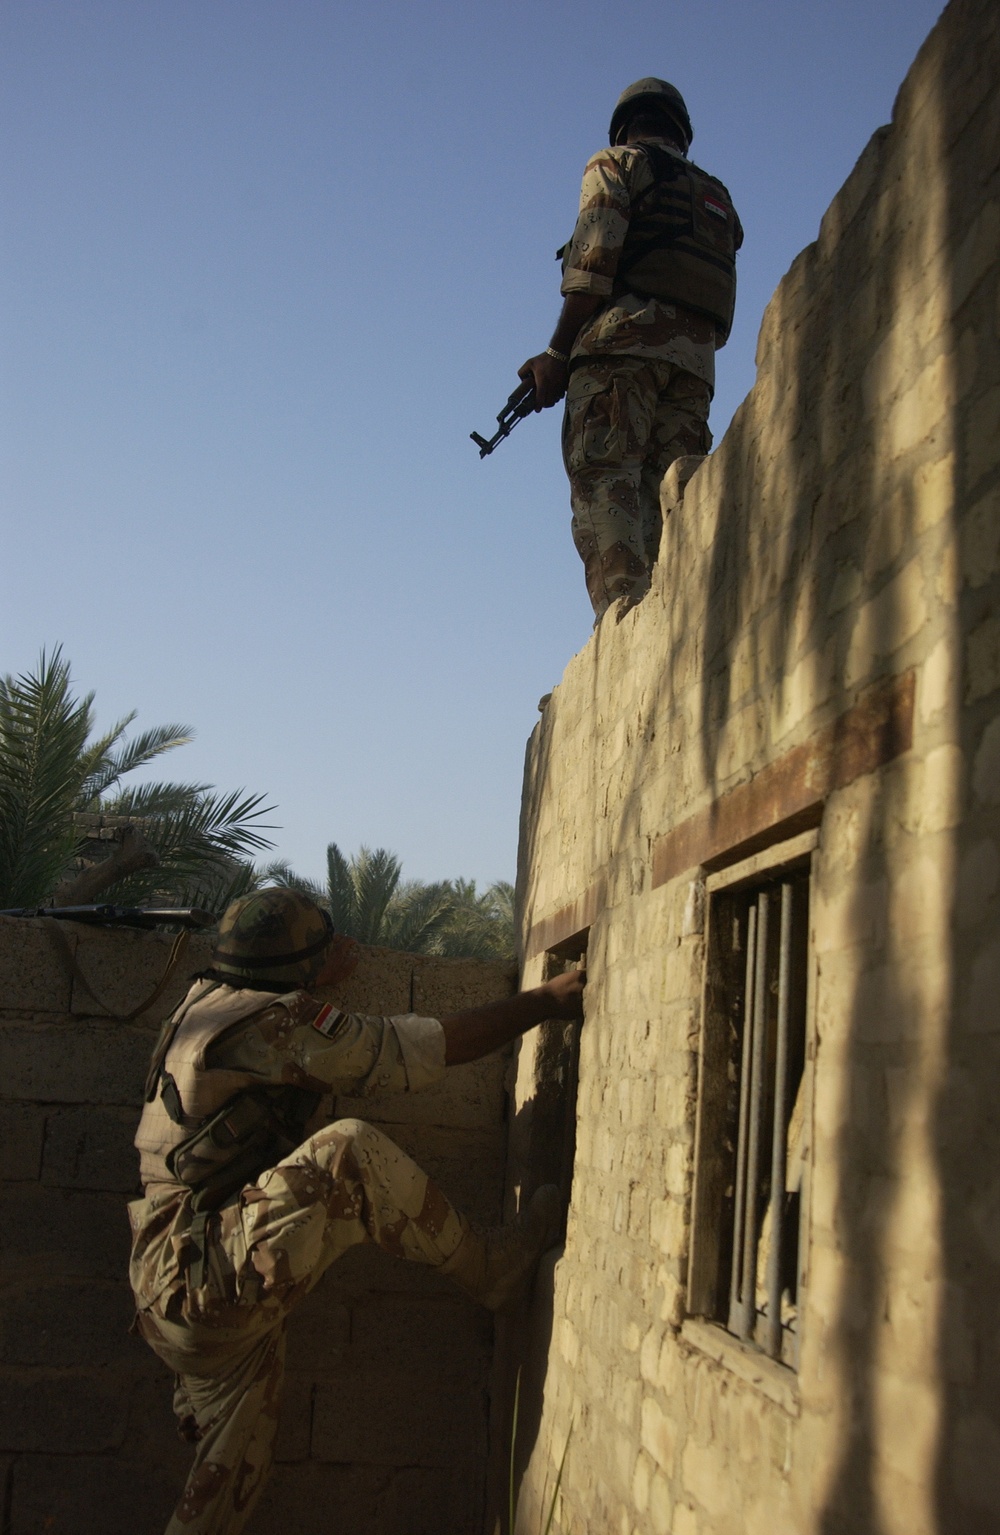 IA, 1st Cav. Soldiers Seek Out Anti-Iraqi Forces in Baqubah